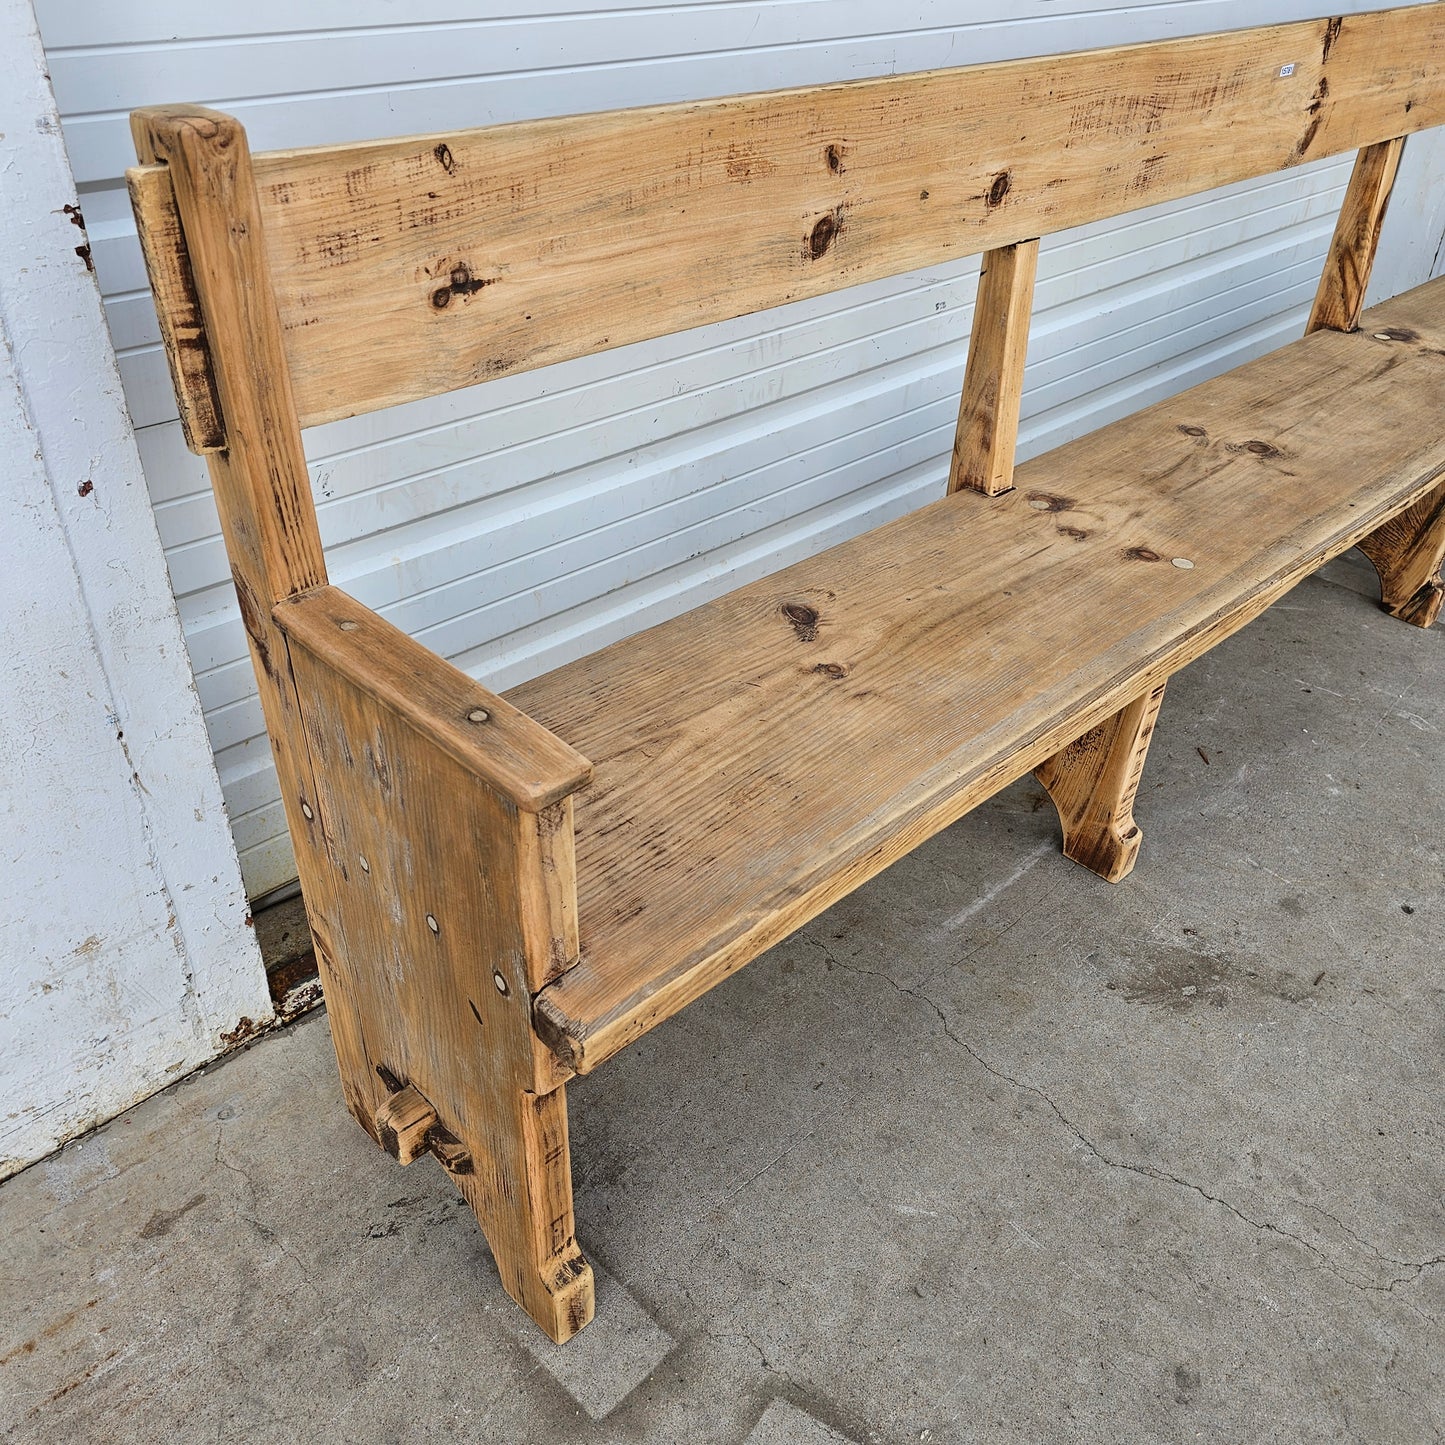 Bleached Train Station Bench